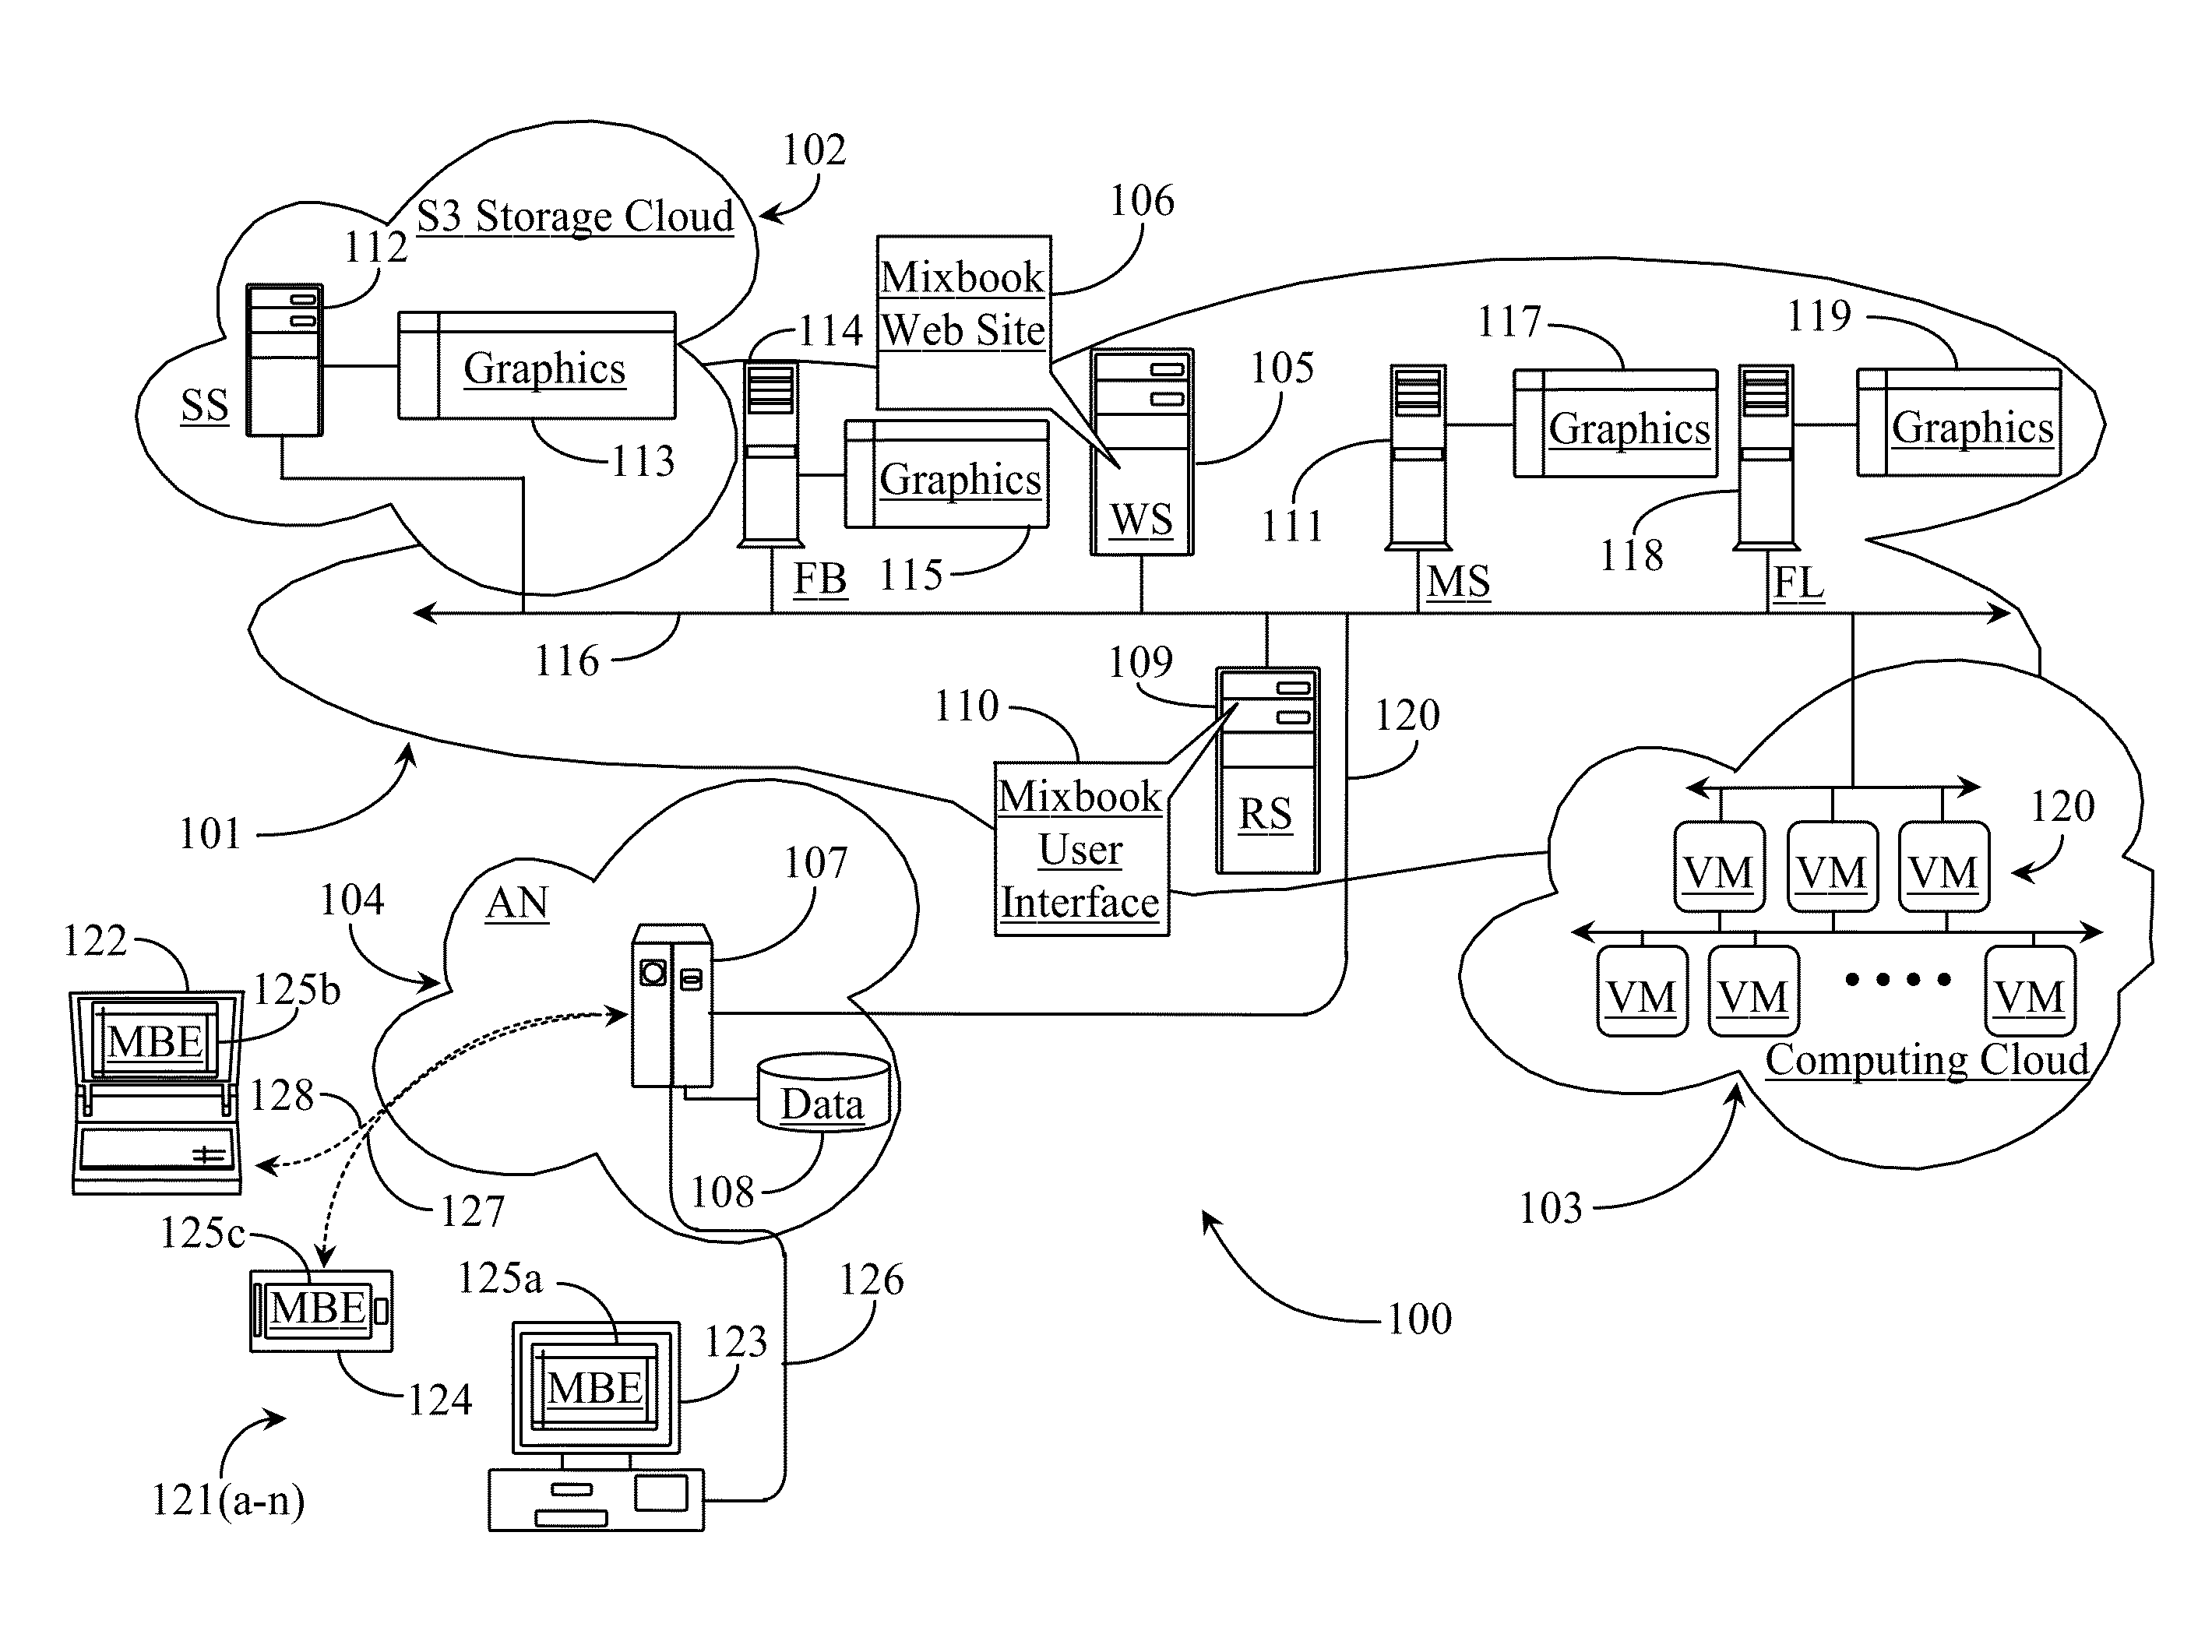 Method for Dynamic Bundling of Graphics Editing Tools presented to Clients engaged in Image-Based Project Creation through an Electronic Interface